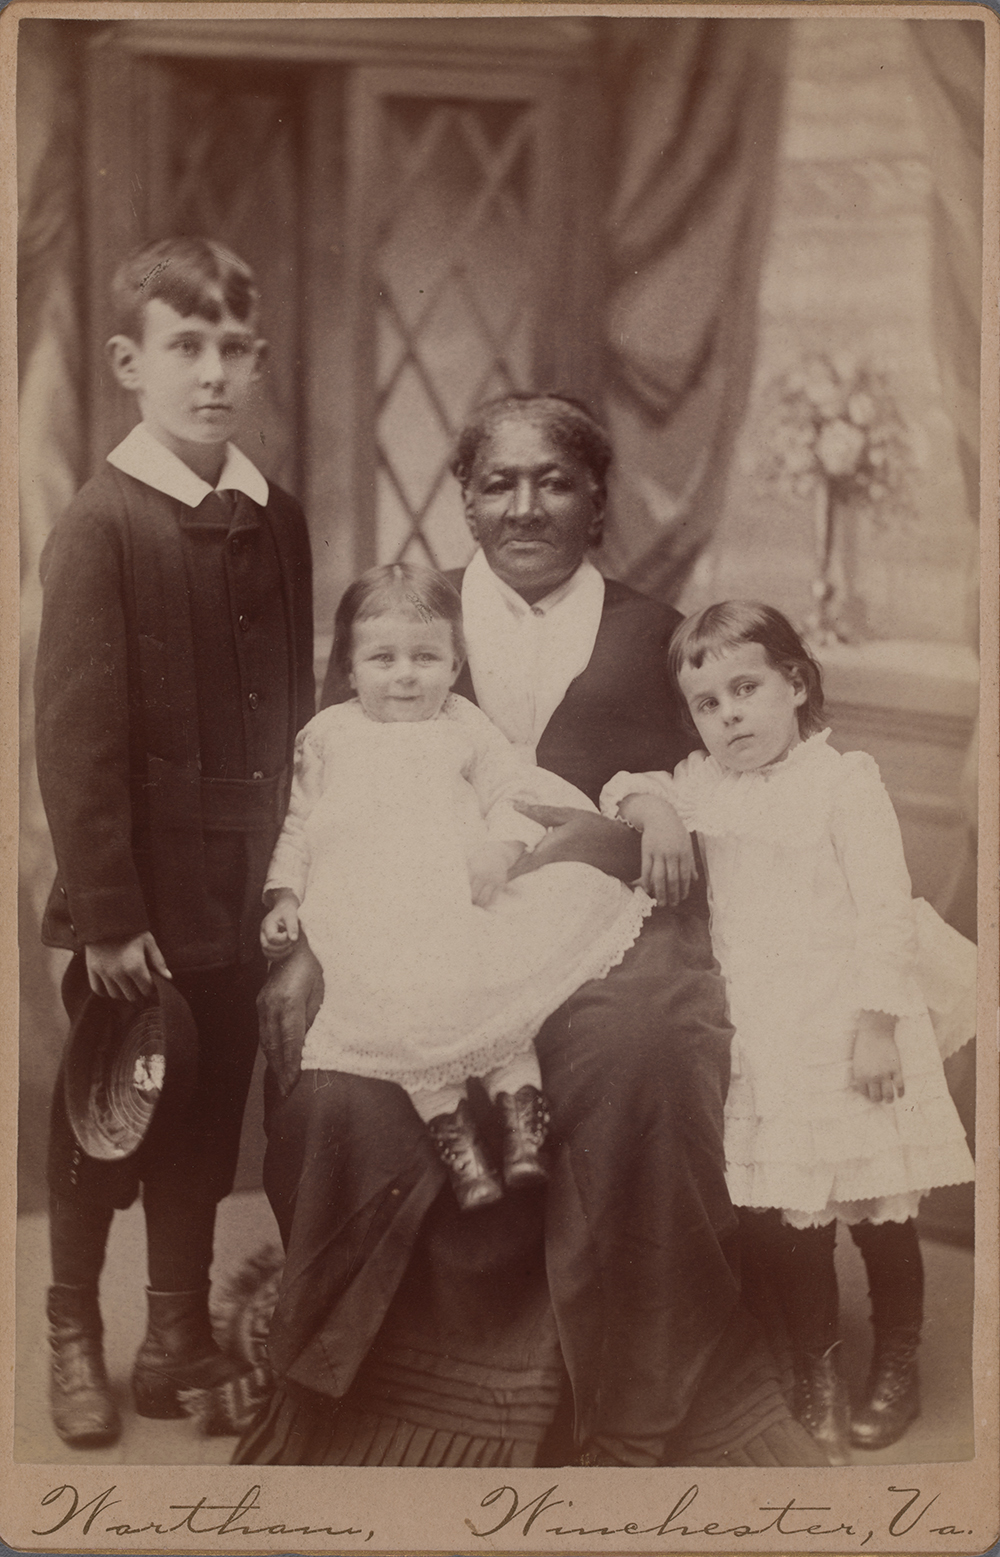 Photograph of an elderly Black woman seated surrounded by a white infant seated on the woman’s proper right knee, a young white girl resting against the woman at her proper left, and a young white boy standing at the woman’s proper right. All subjects are against a studio photography backdrop